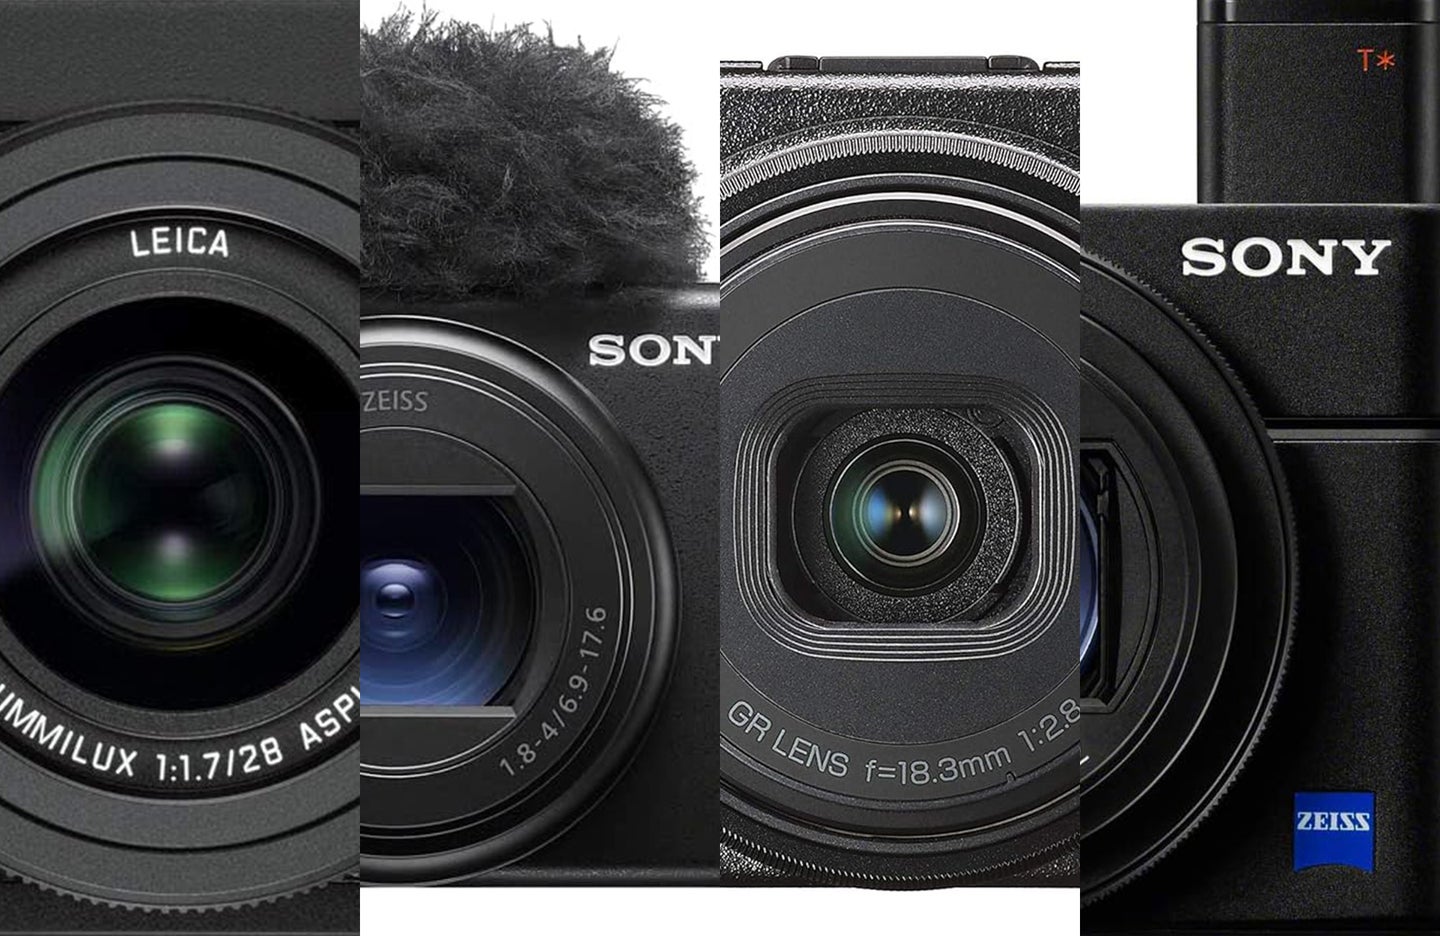 Four of the best compact cameras are sliced together against a white background.